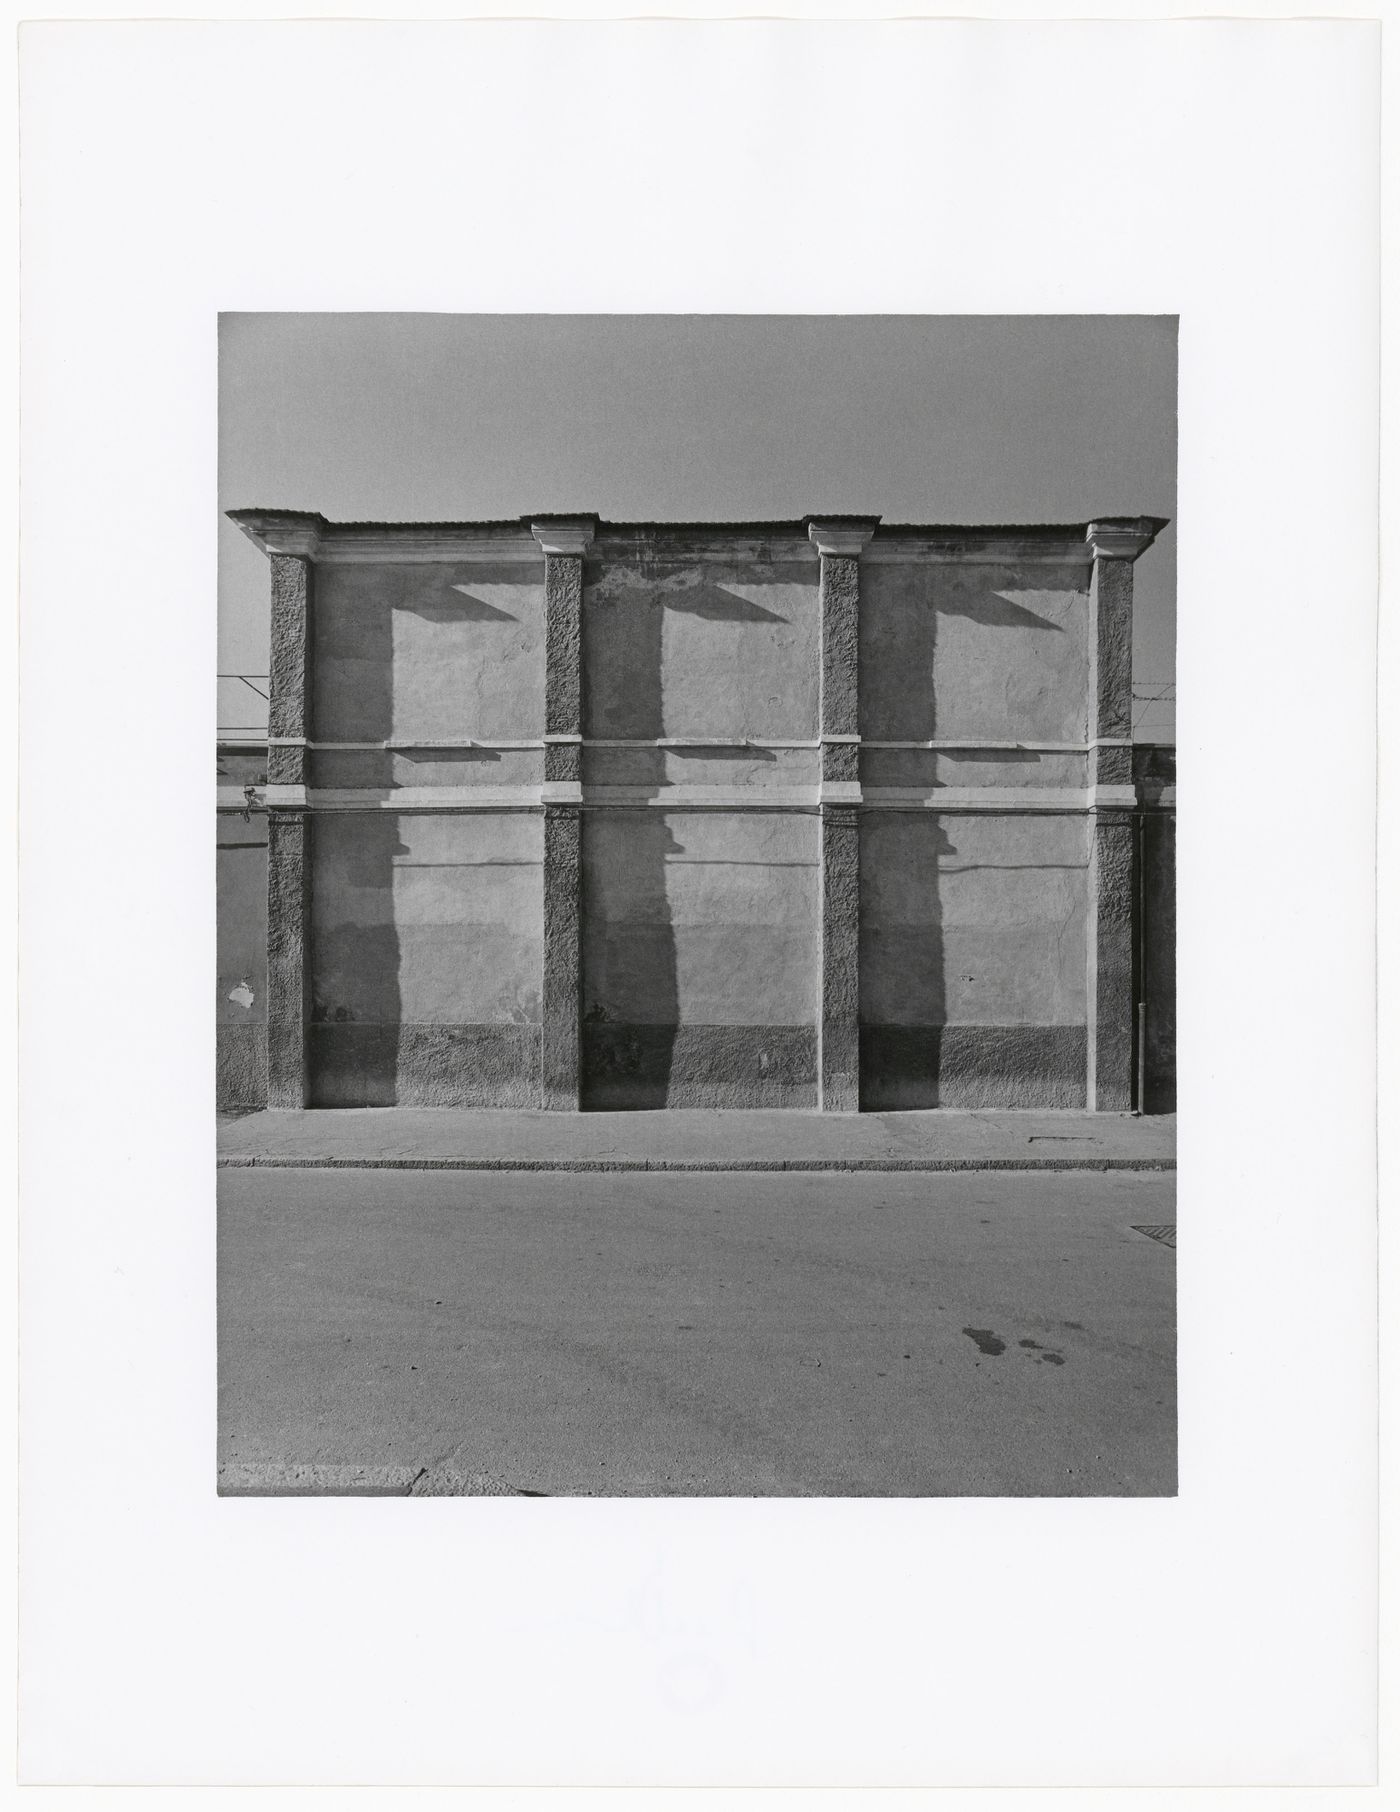 View of warehouse with brick wall in front, taken from across the street, via Raffaele Rubattino, Milan, Italy